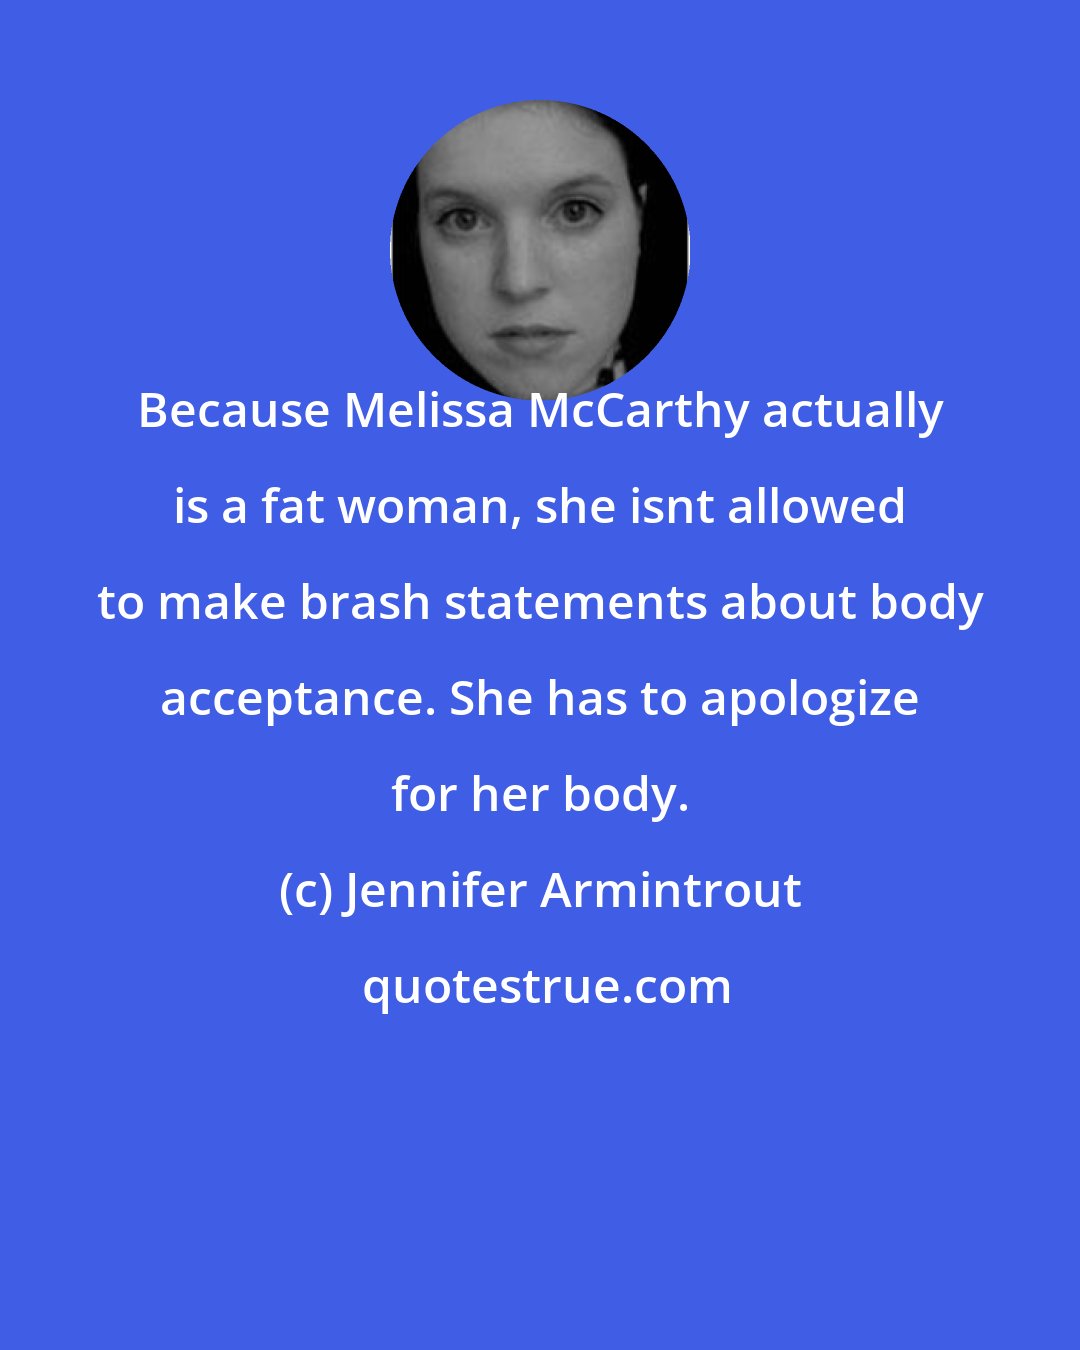 Jennifer Armintrout: Because Melissa McCarthy actually is a fat woman, she isnt allowed to make brash statements about body acceptance. She has to apologize for her body.